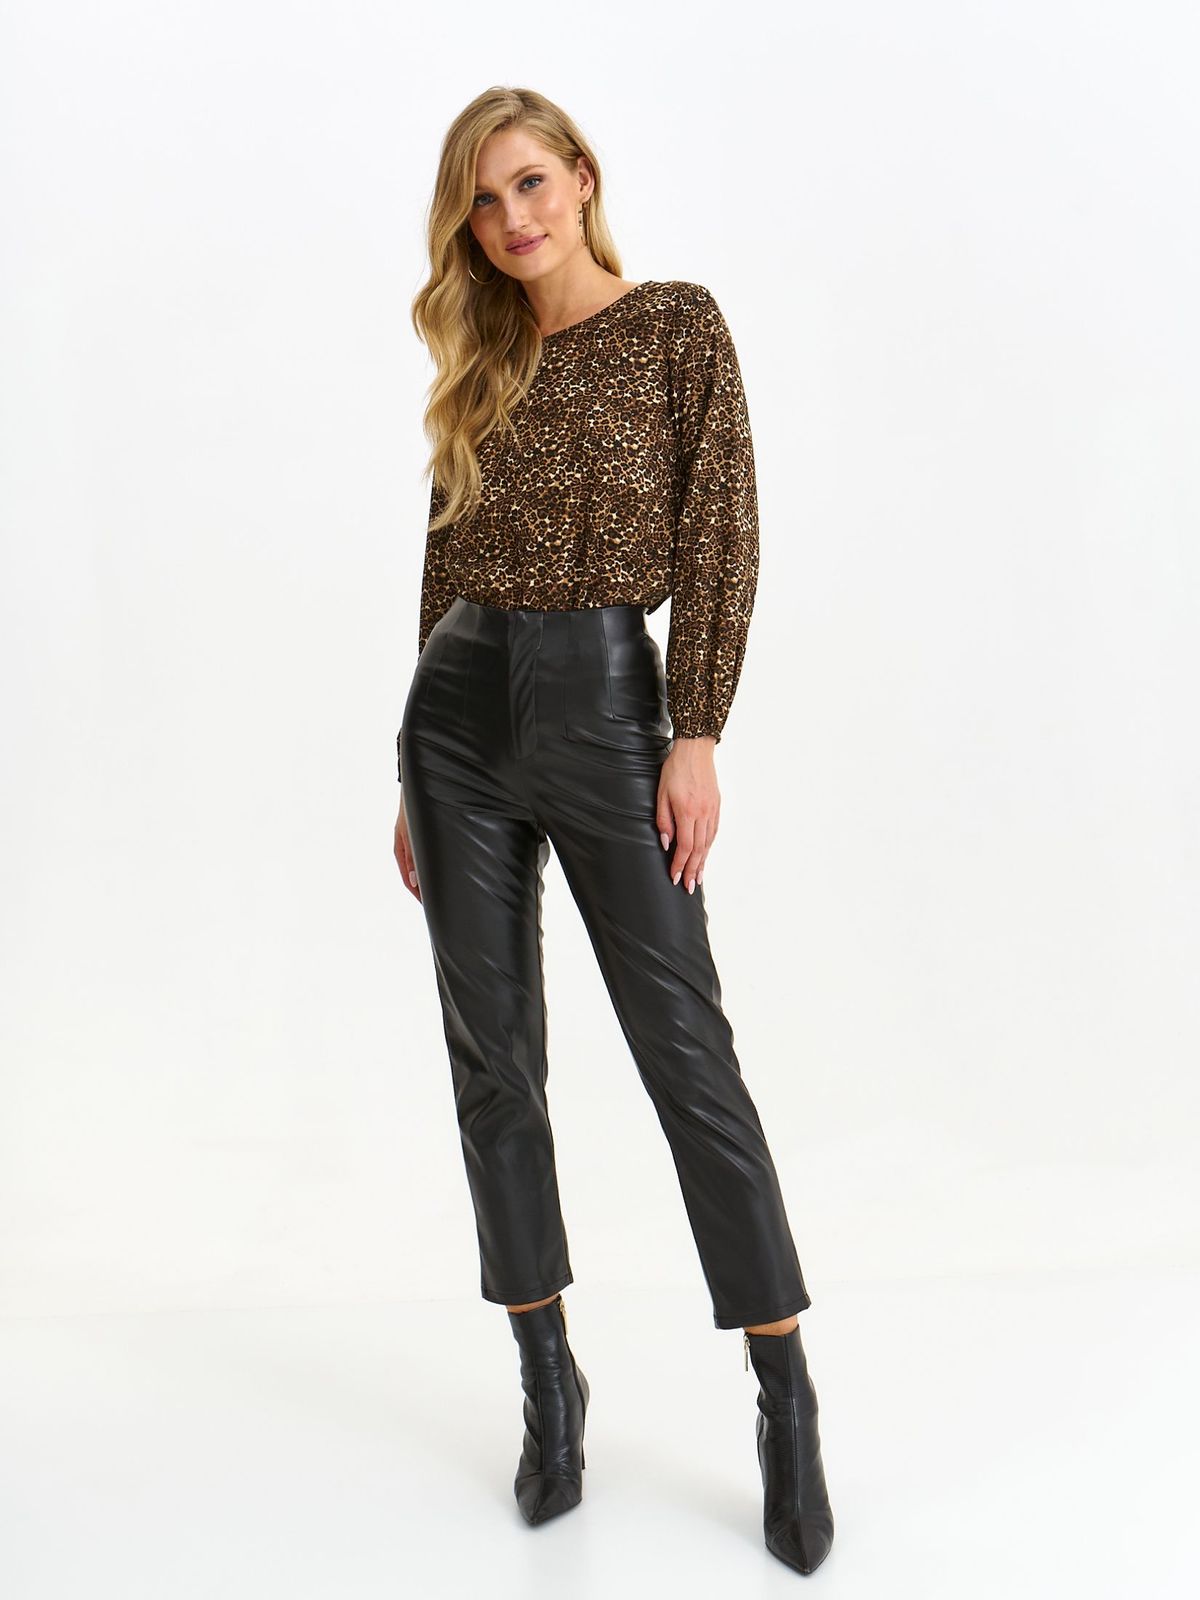 Black trousers from ecological leather conical high waisted